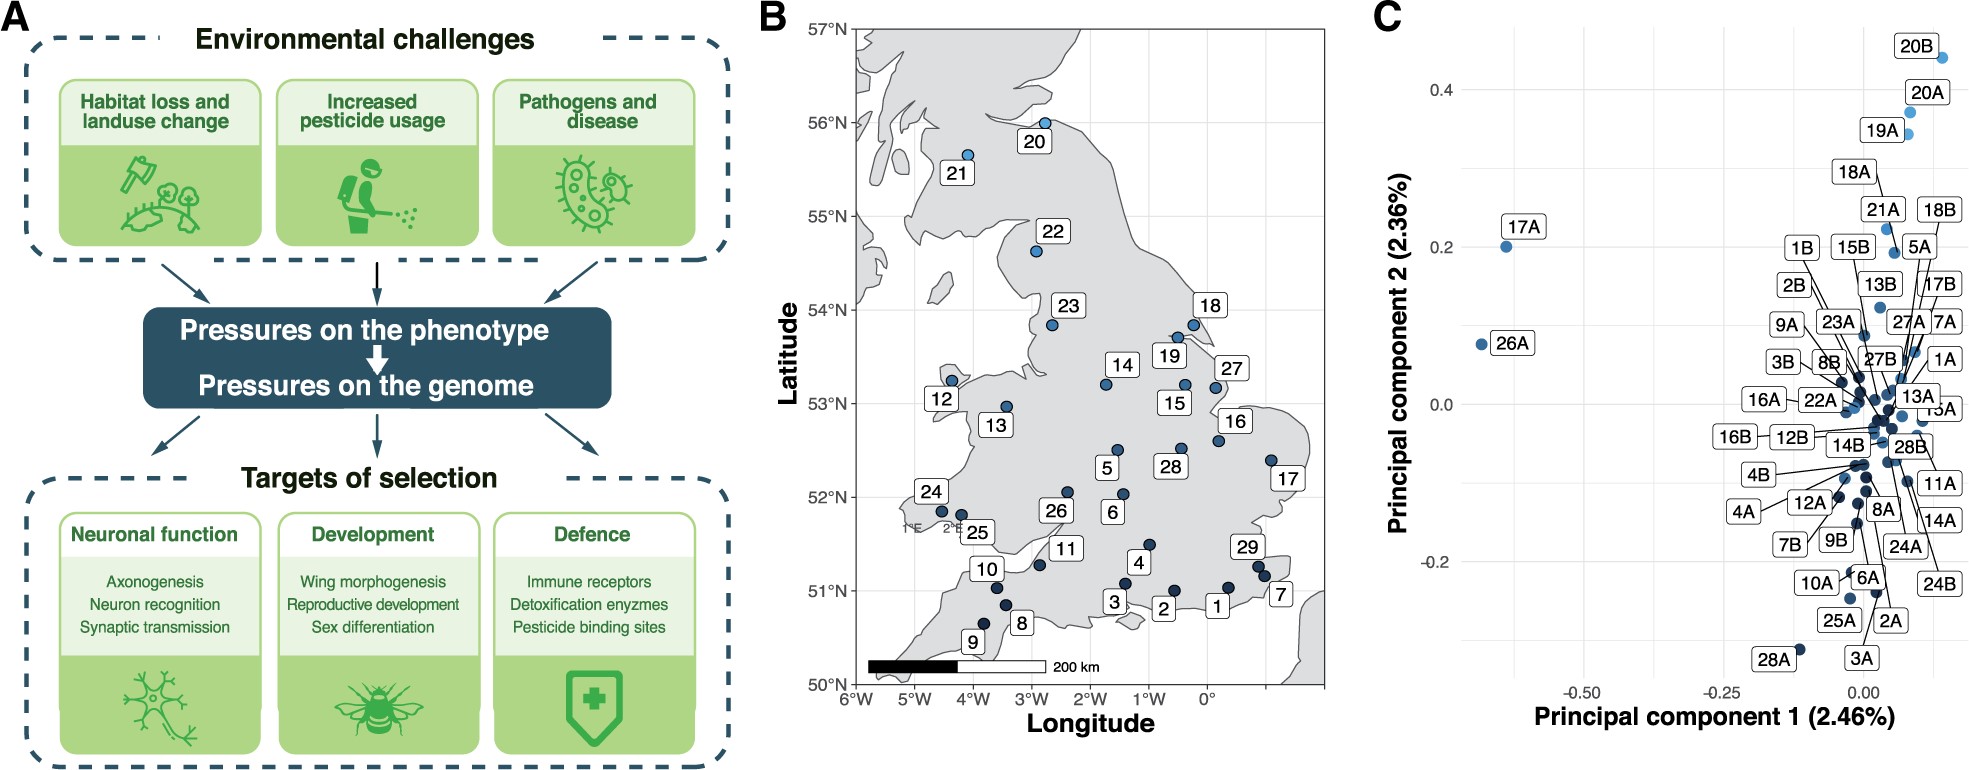 Environmental pressures affecting insect pollinators and population structure of wild-caught British B. terrestris